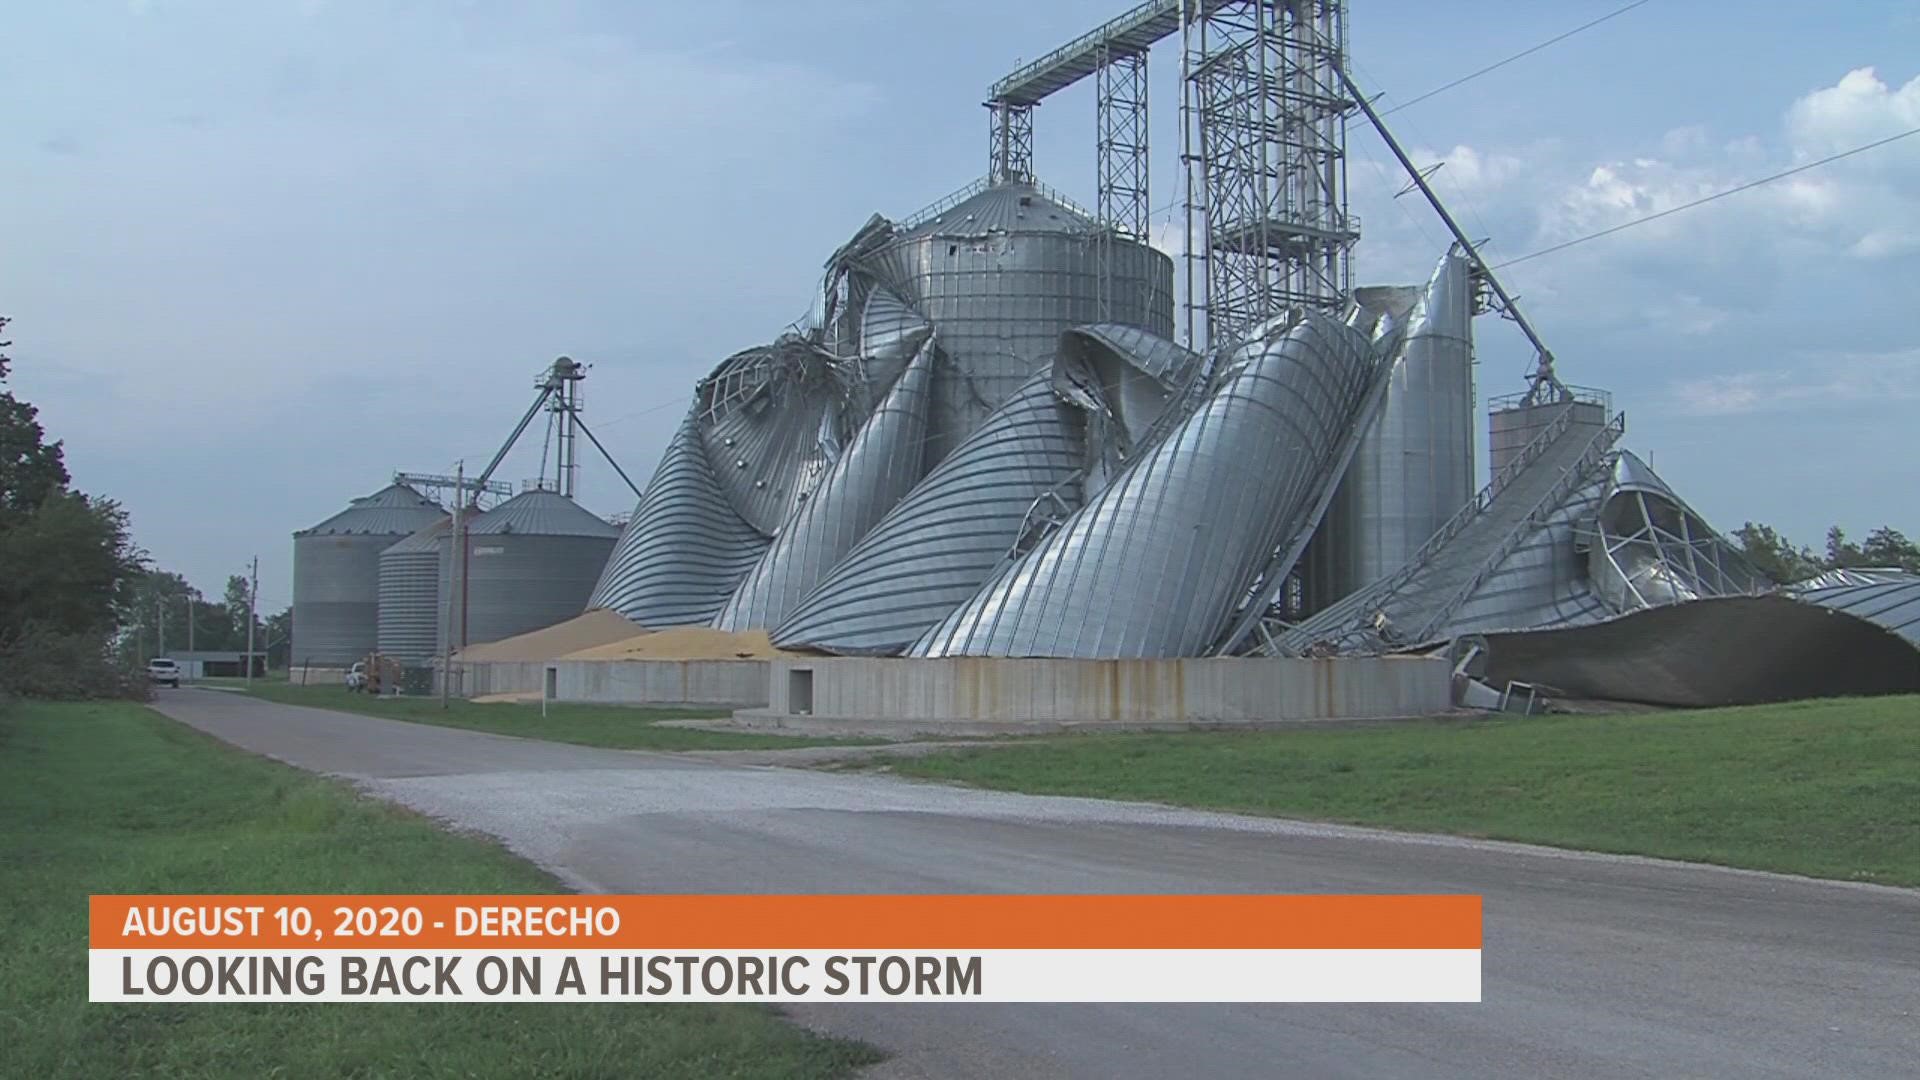 The August 10, 2020 derecho was the costliest thunderstorm in U.S. history, and it had major effects on Iowa's agriculture sector.